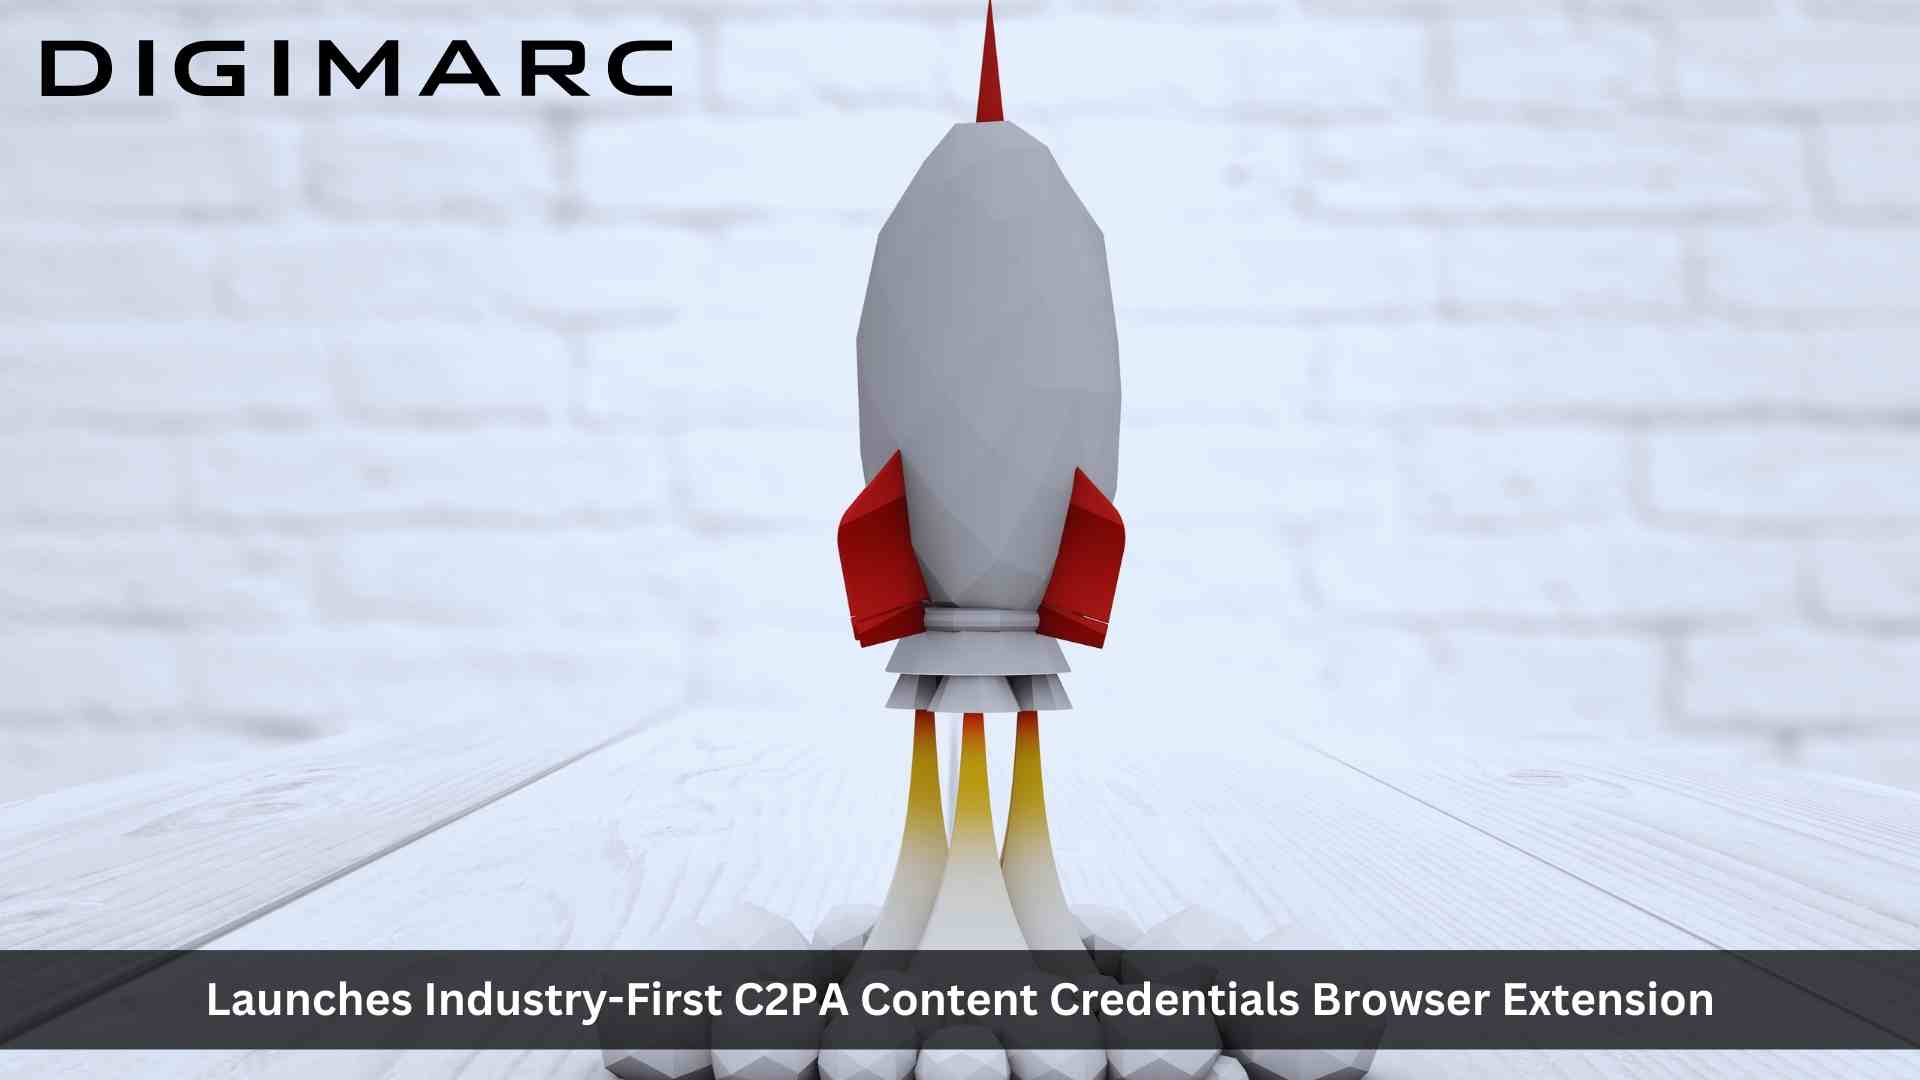 Digimarc Launches Industry-First C2PA Content Credentials Browser Extension